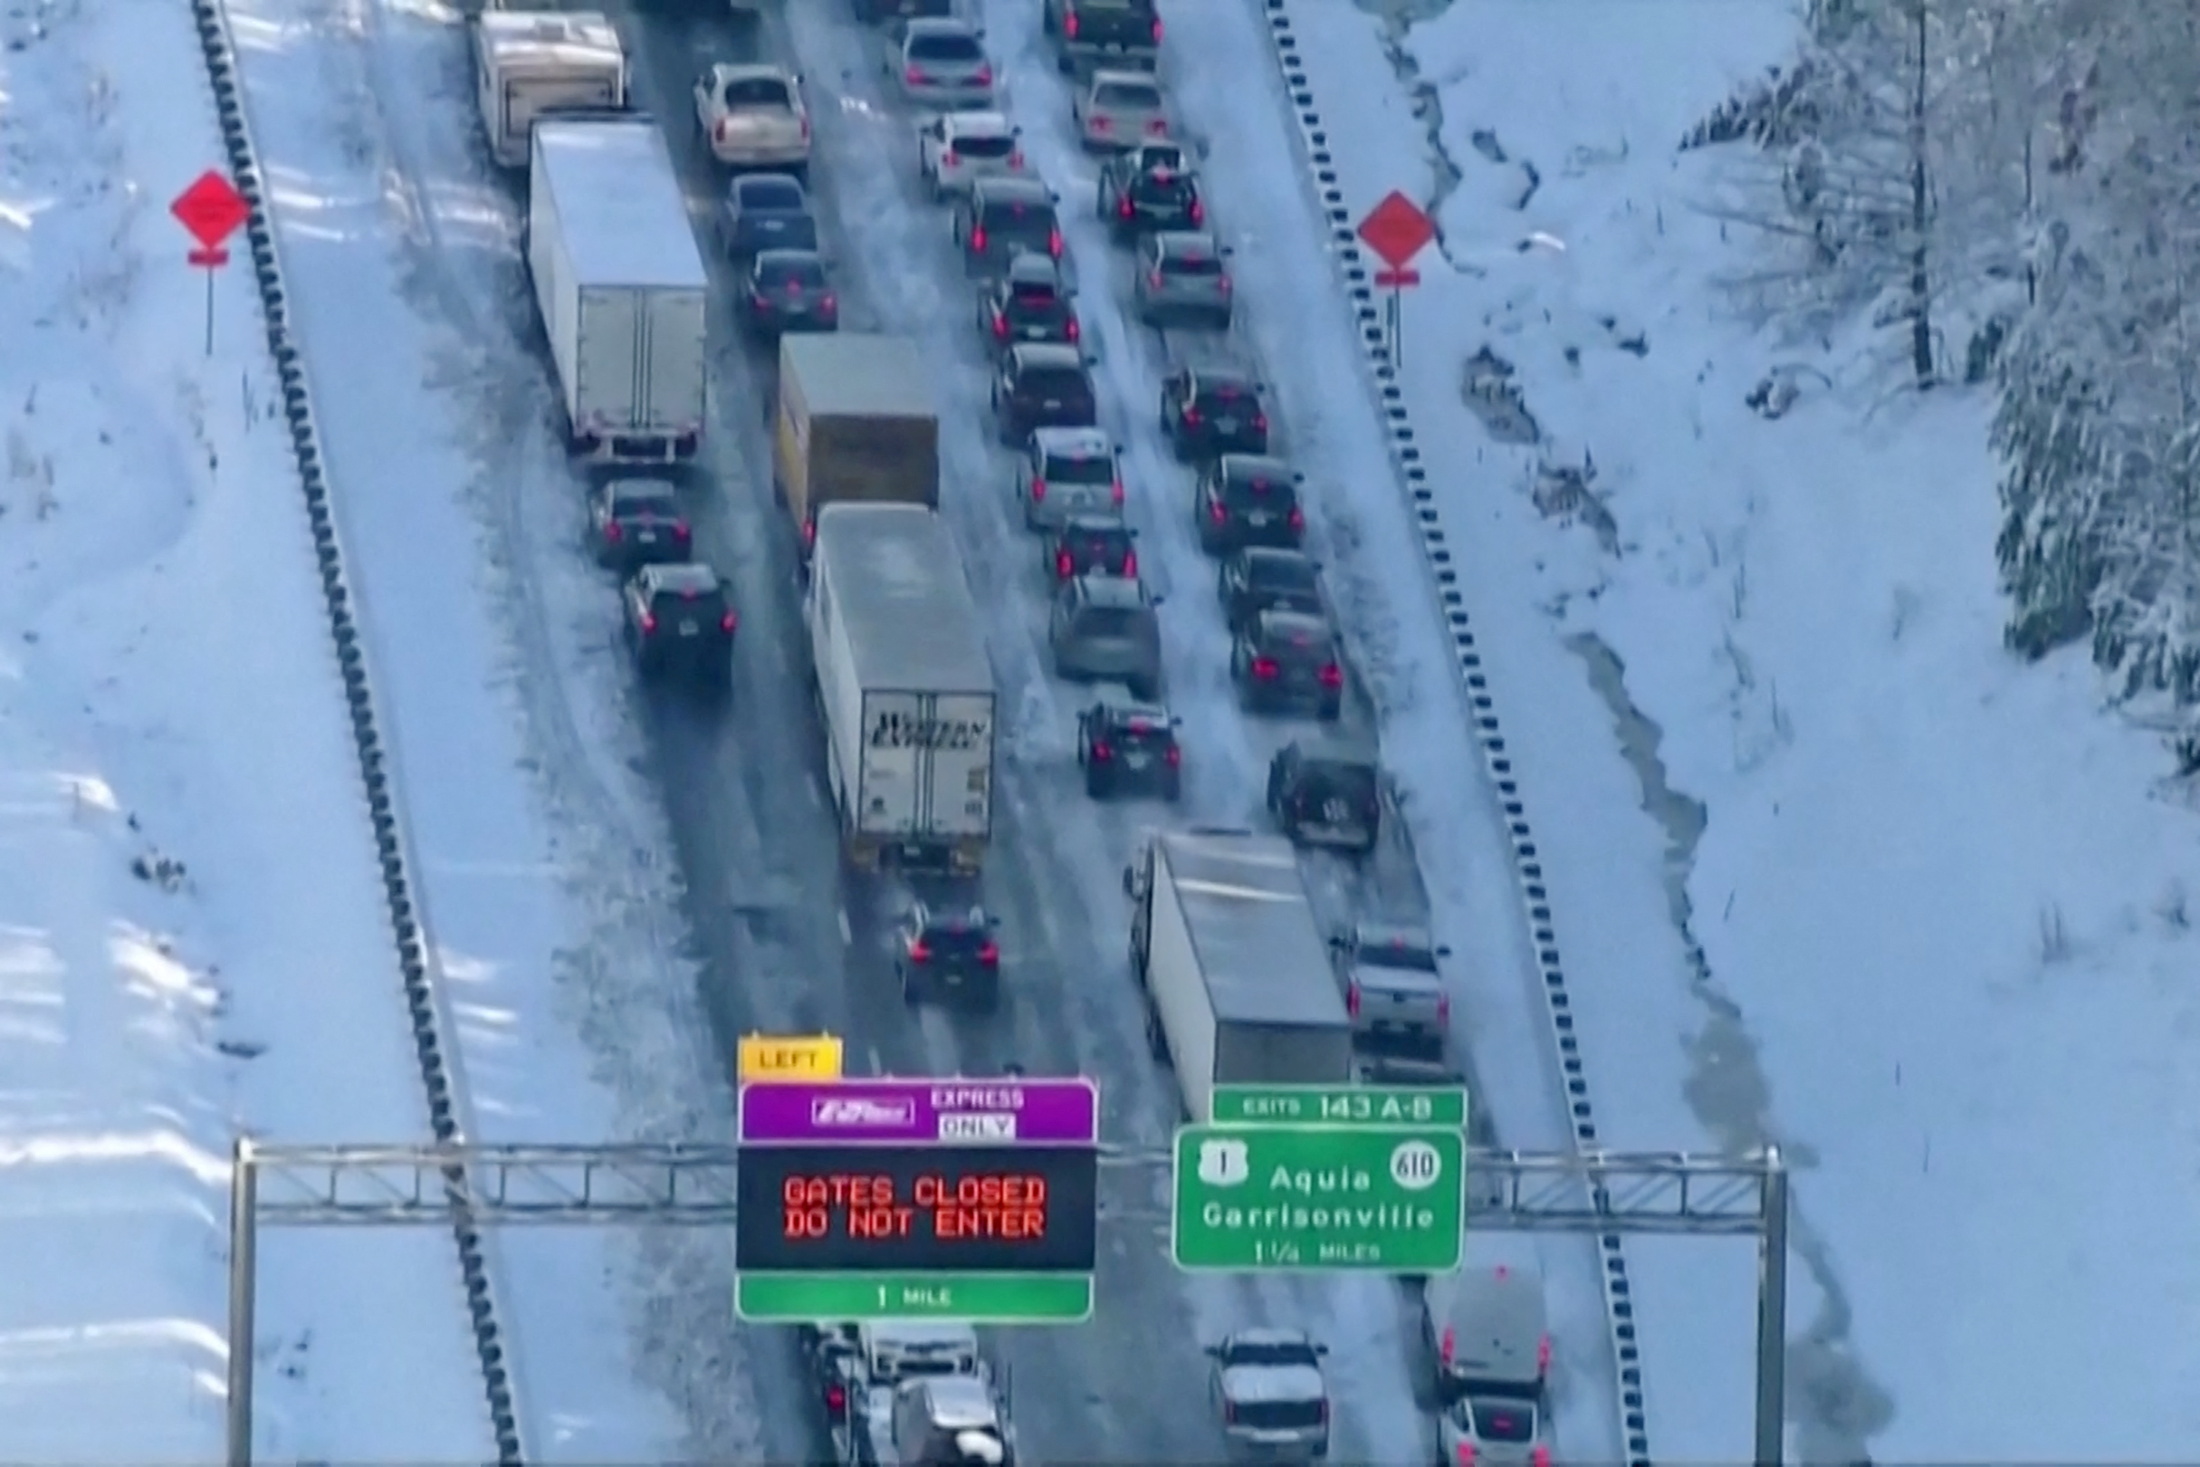 TELL ME SOMETHING GOOD: Connecticut helps out stranded motorists gridlocked on I-95 in Virginia during  crazy snow